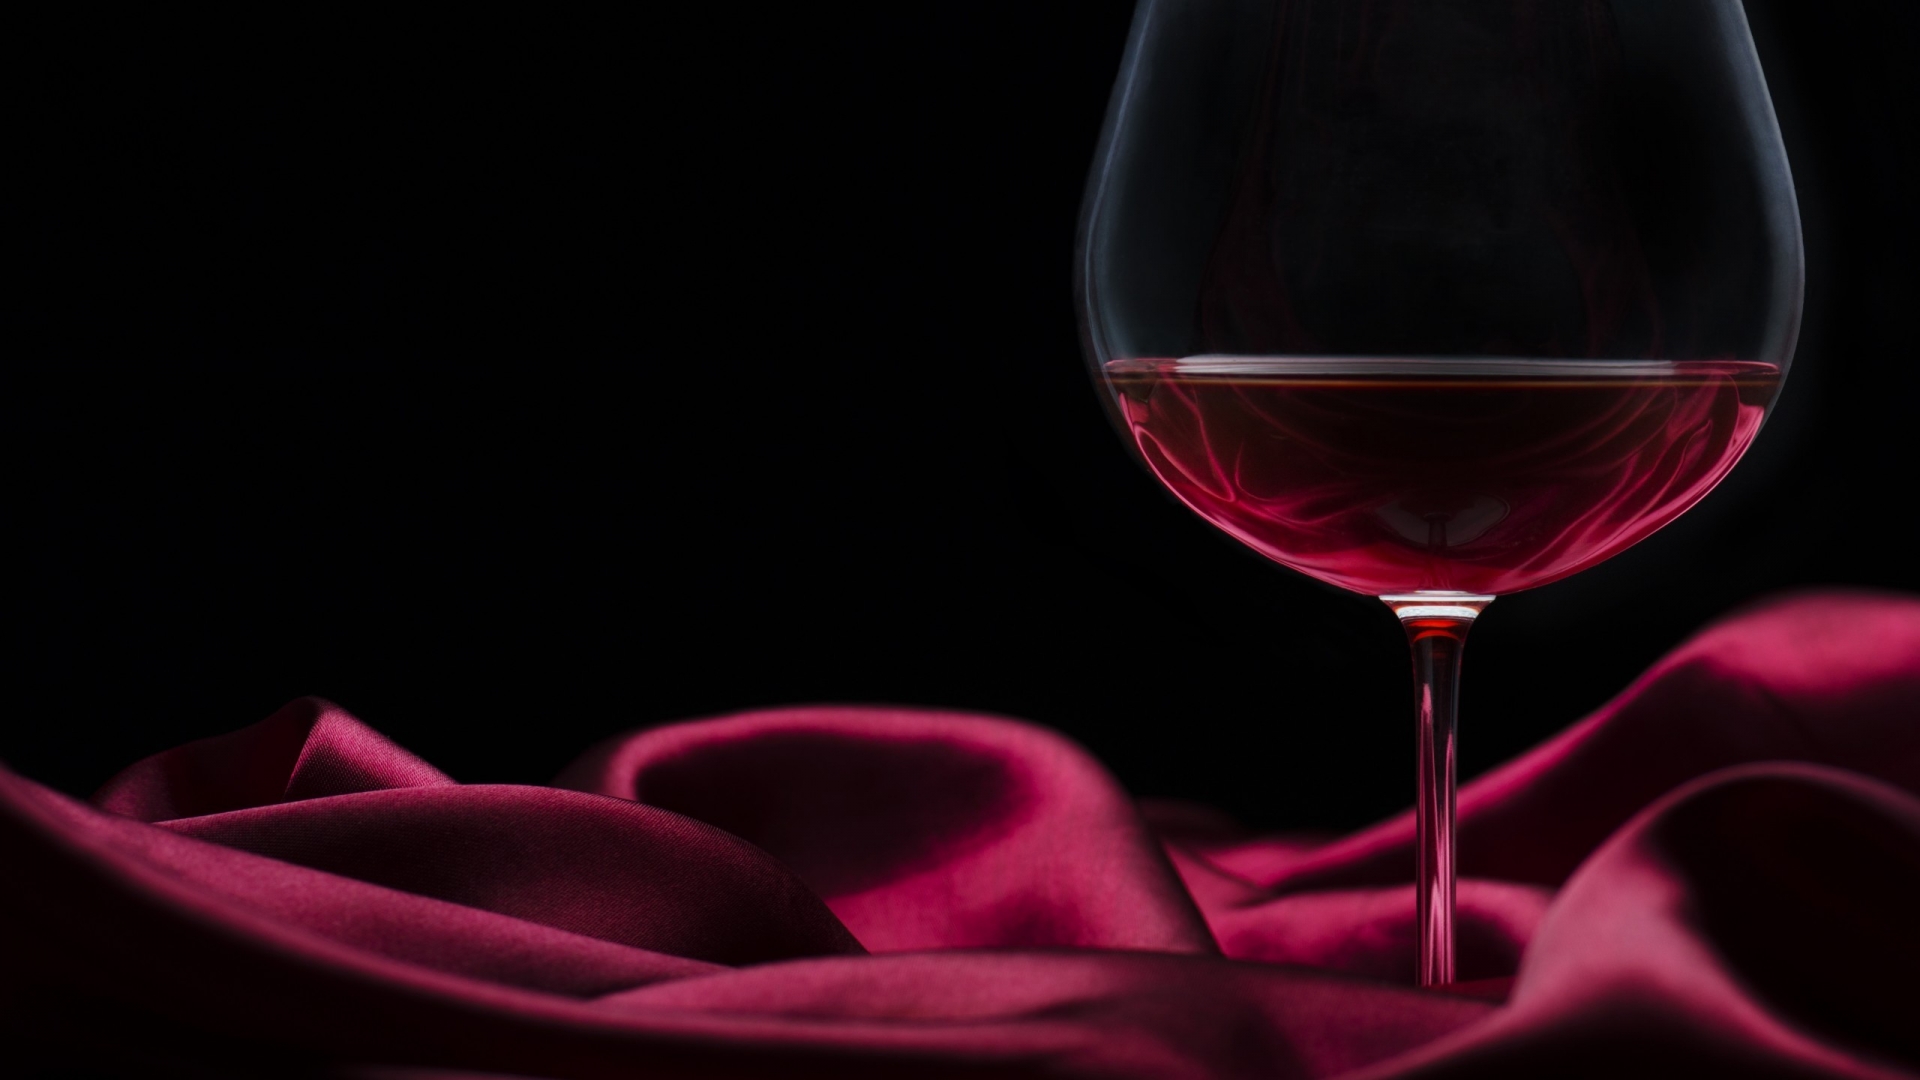 Red Wine for 1920 x 1080 HDTV 1080p resolution